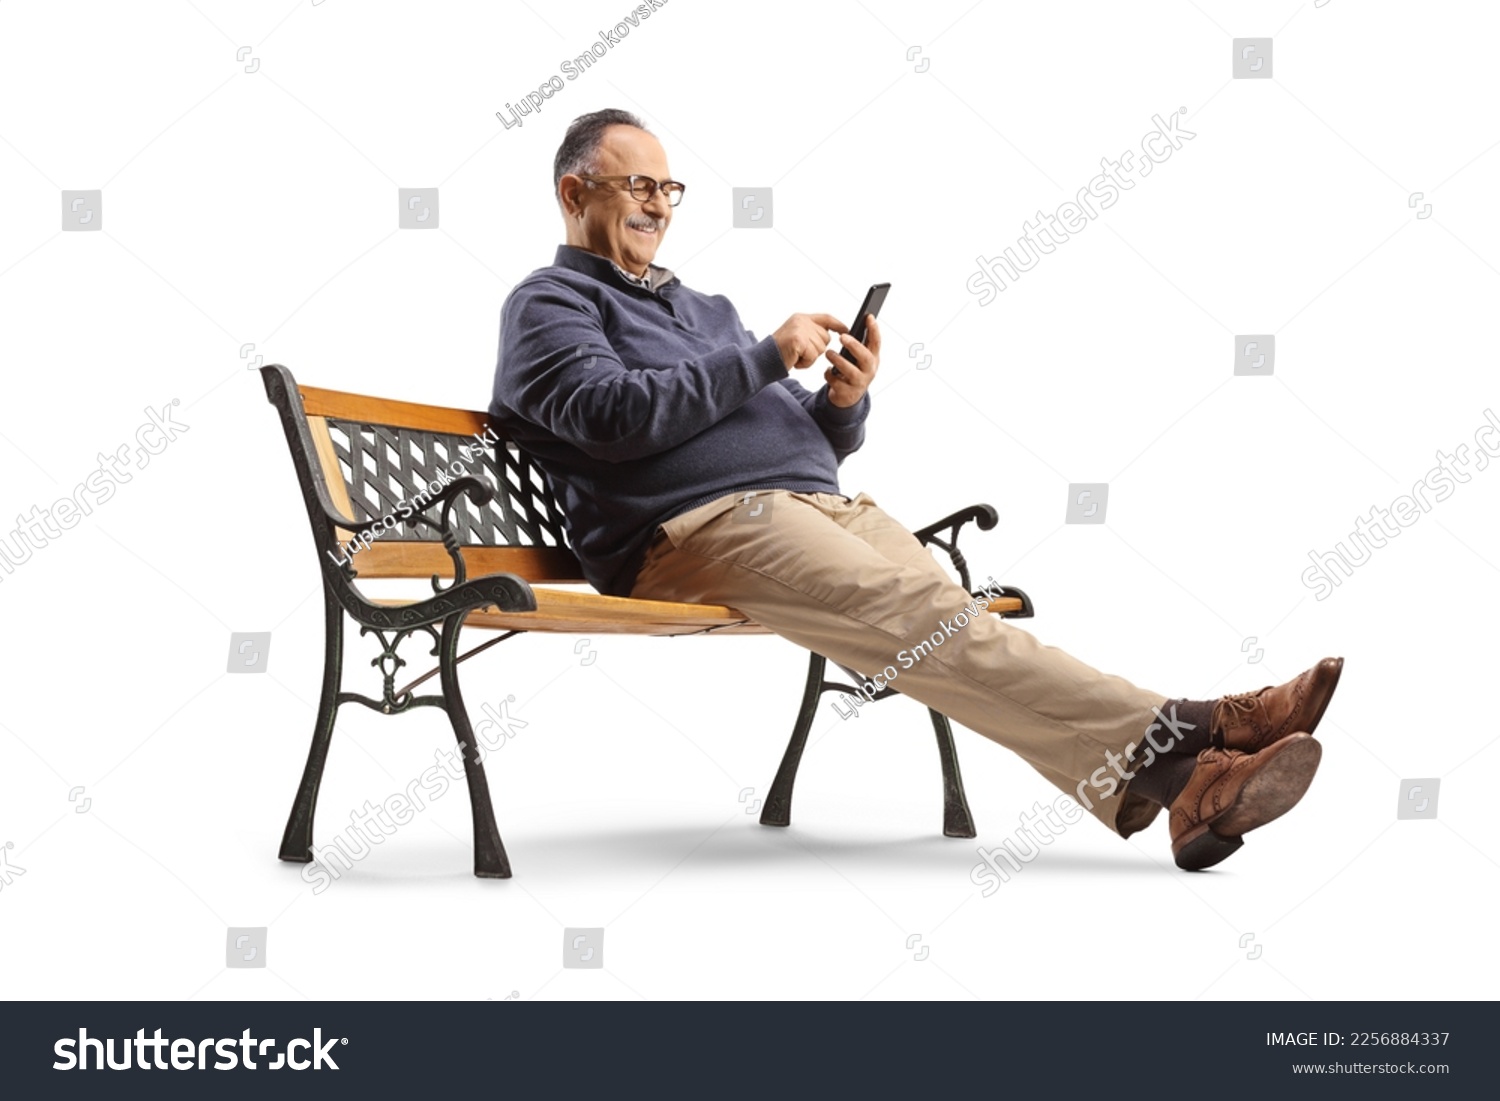 Mature man sitting on a bench and using a smartphone isolated on white background #2256884337